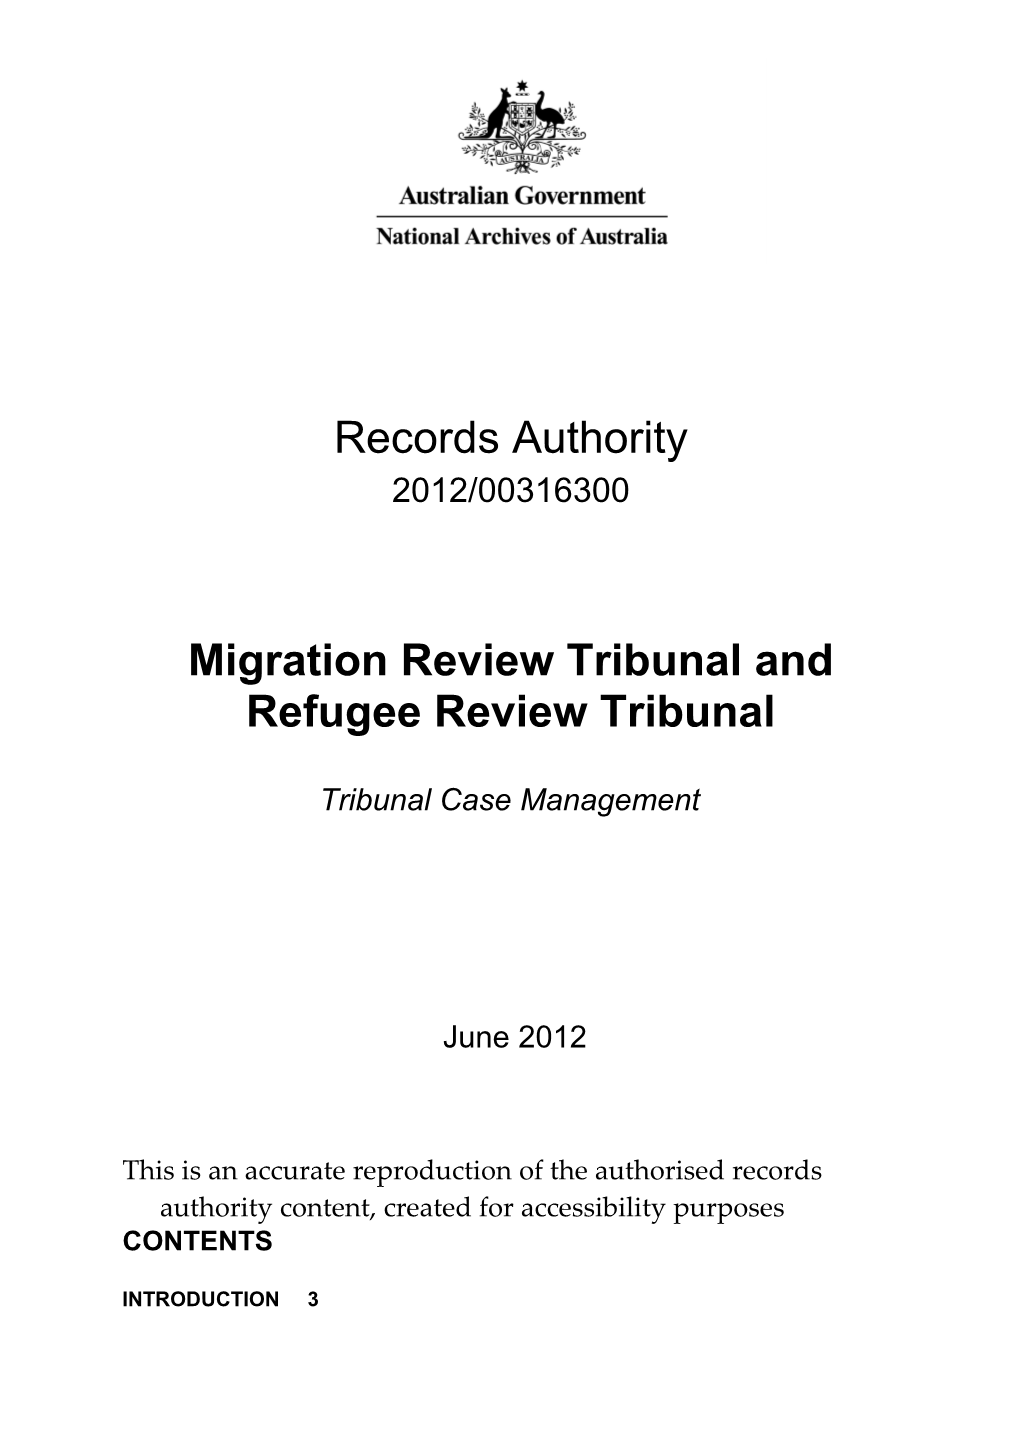 Migration Review Tribunal and Refugee Review Tribunal 2012/00316300